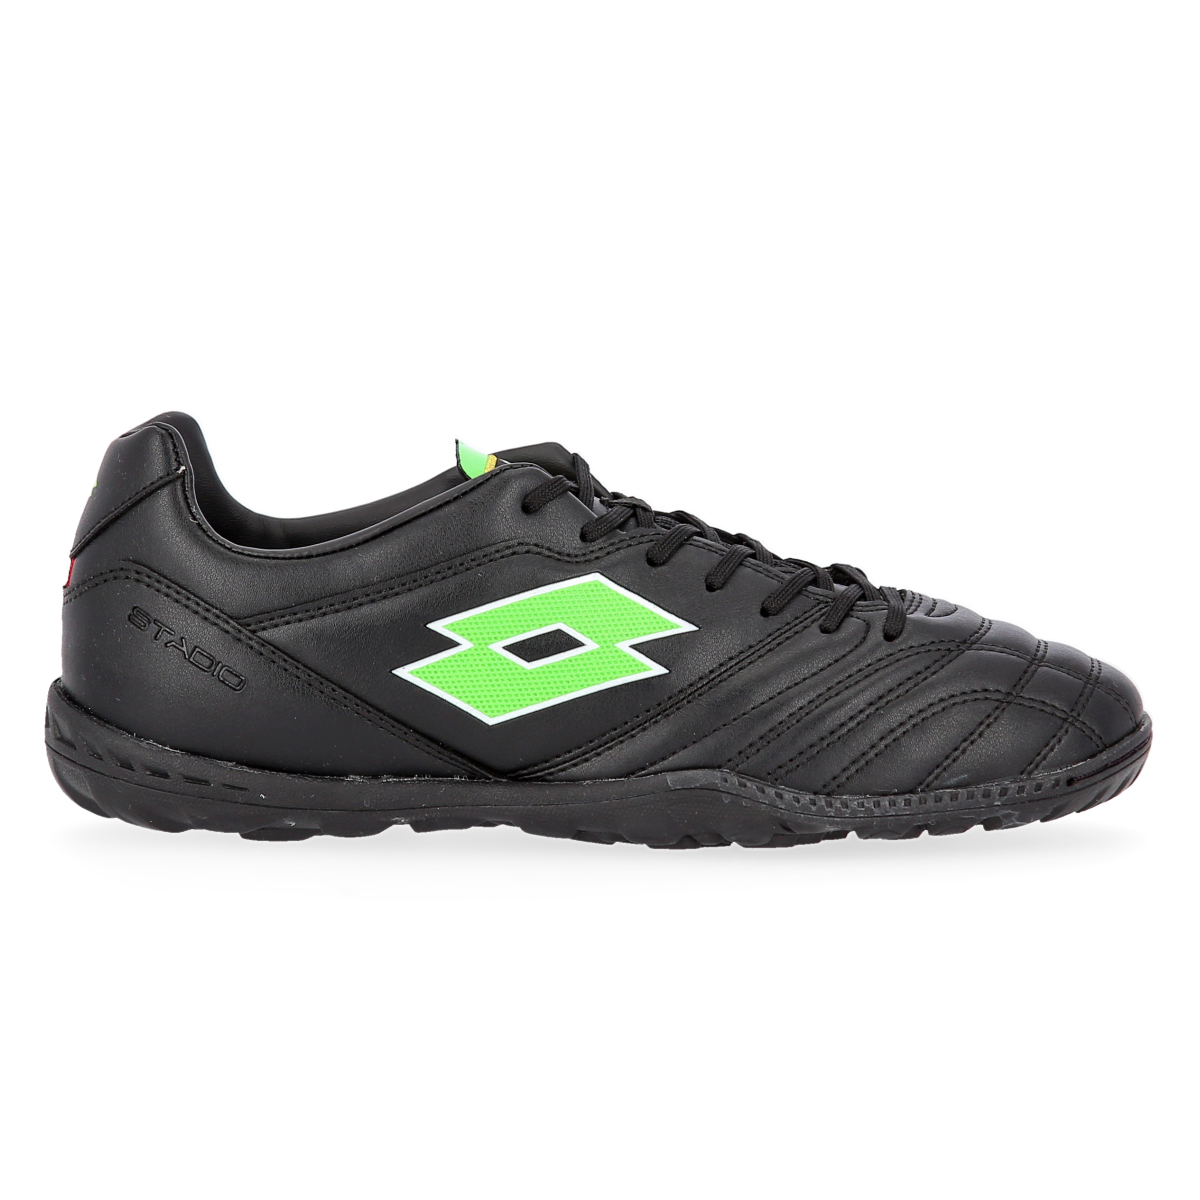 Botines Fútbol Lotto Stadio 700 Tf Hombre,  image number null